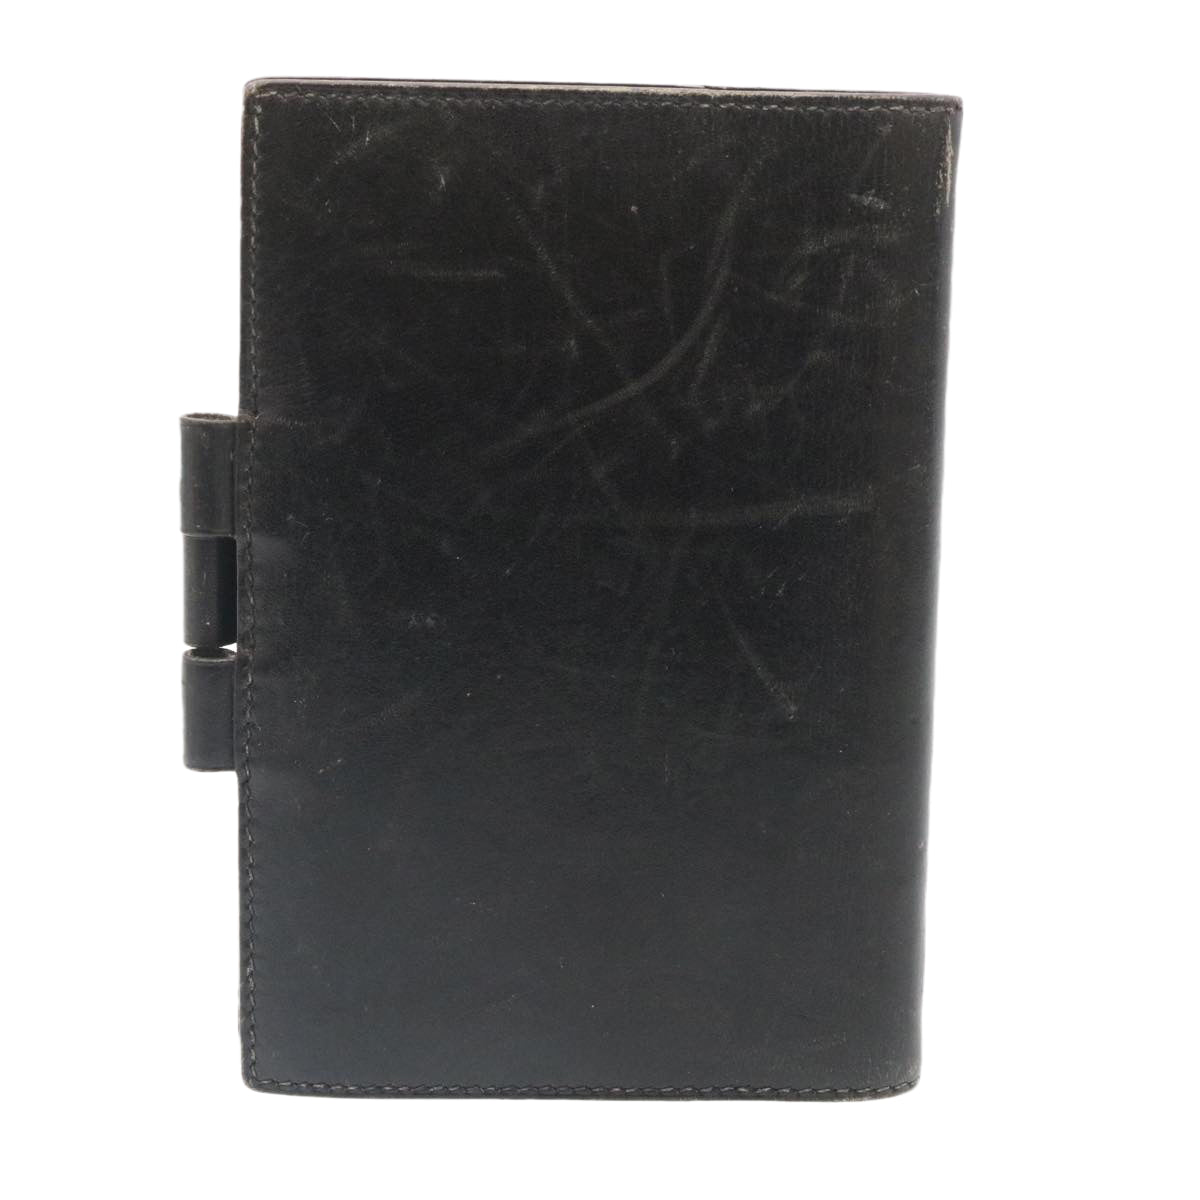 HERMES Day Planner Cover Leather Black Auth 34699